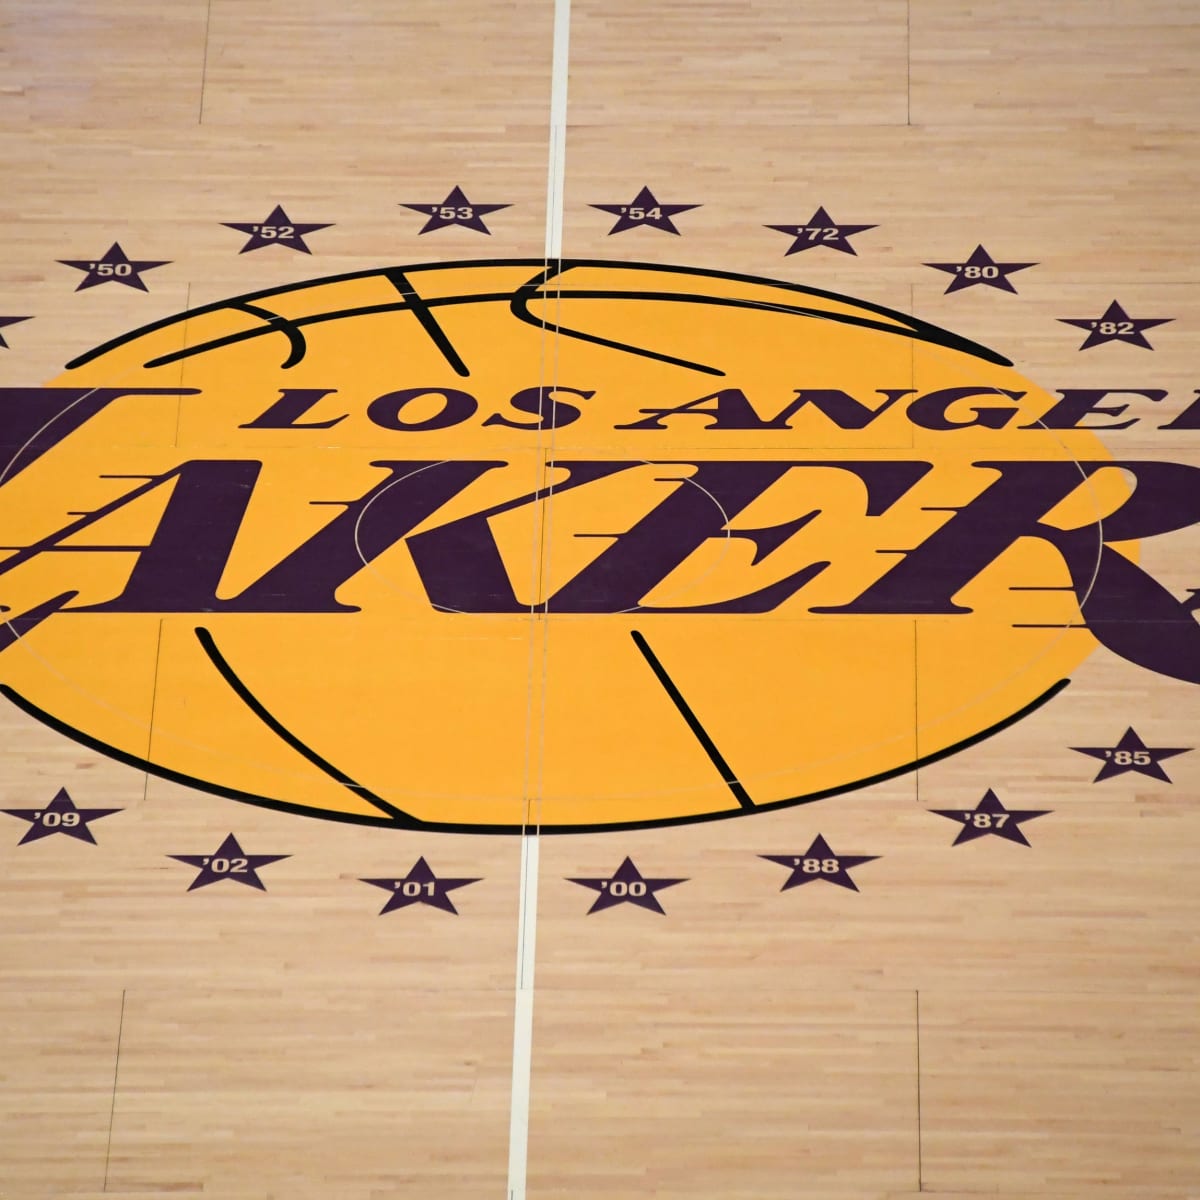 AEG Extends Lease With Lakers At Staples Center